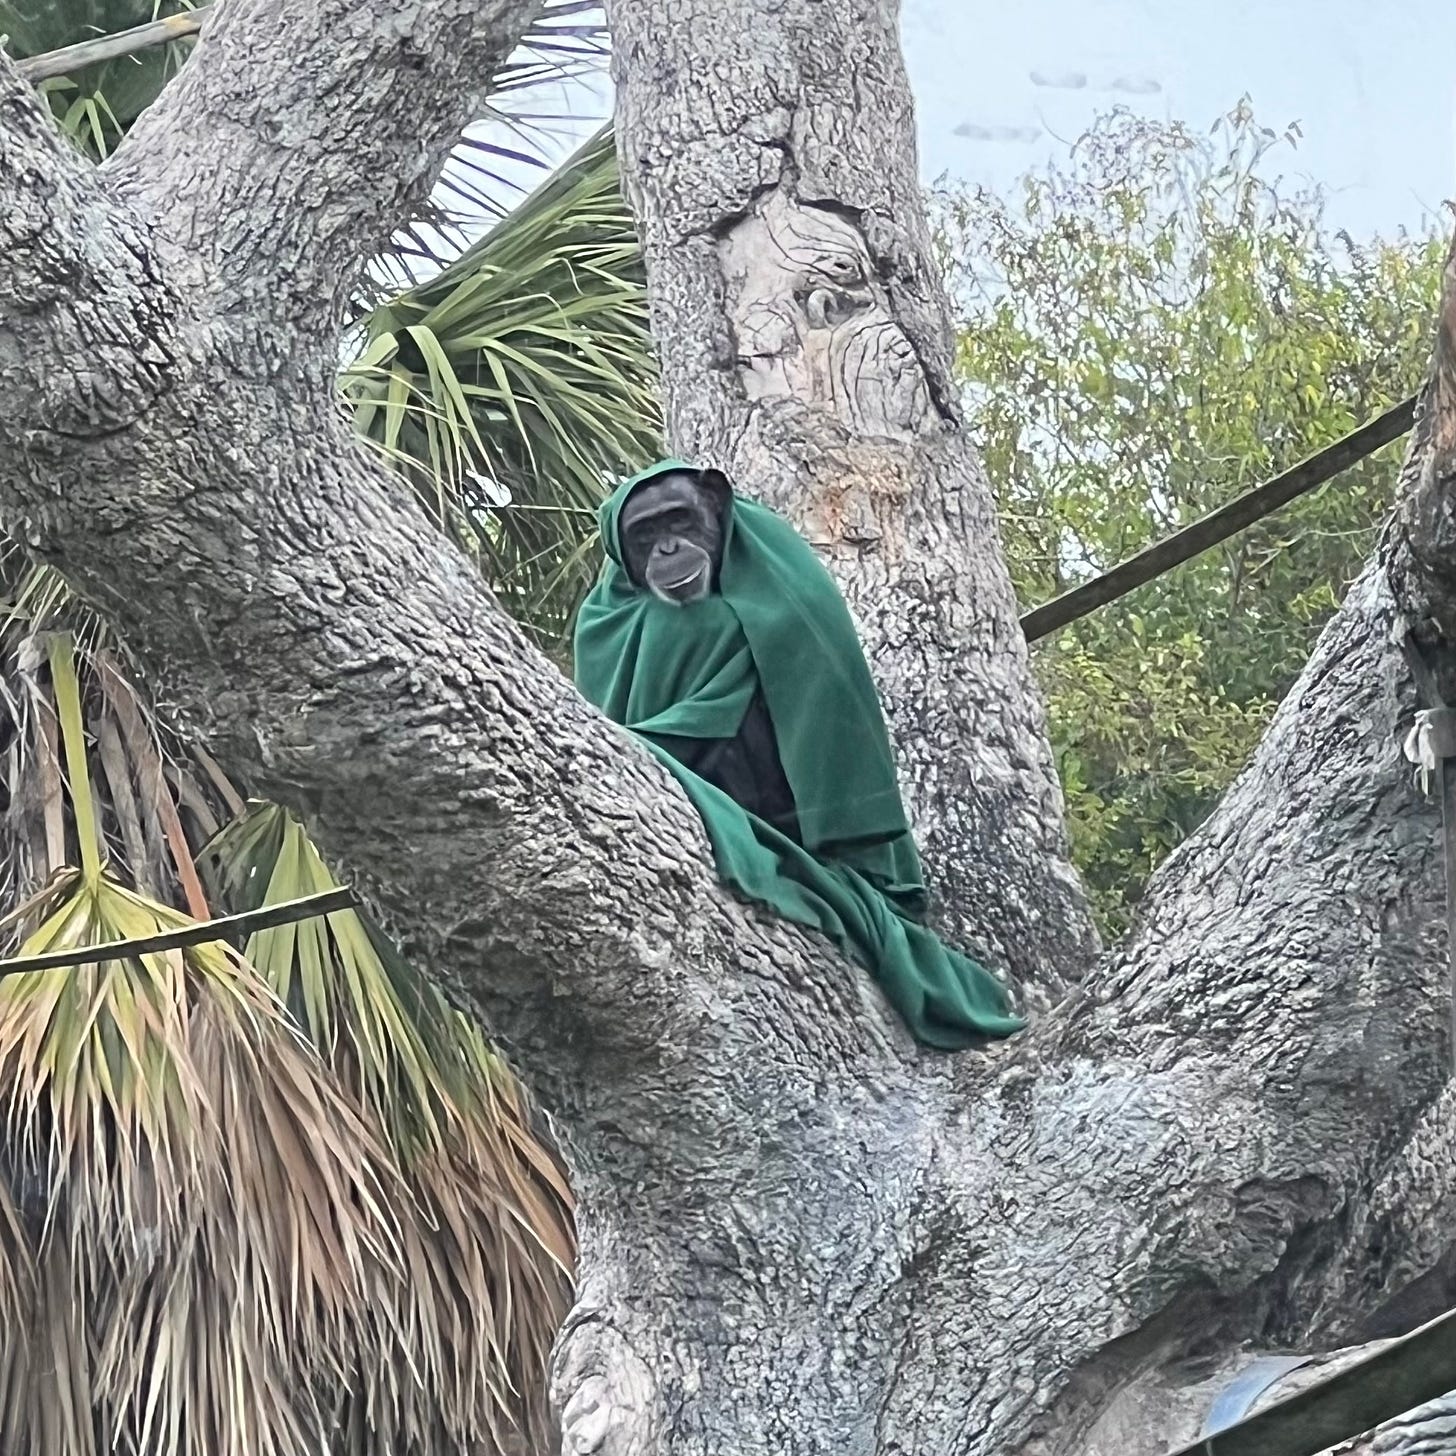 A chimpanzee sitting in a tree branch wrapped up in a green blanket